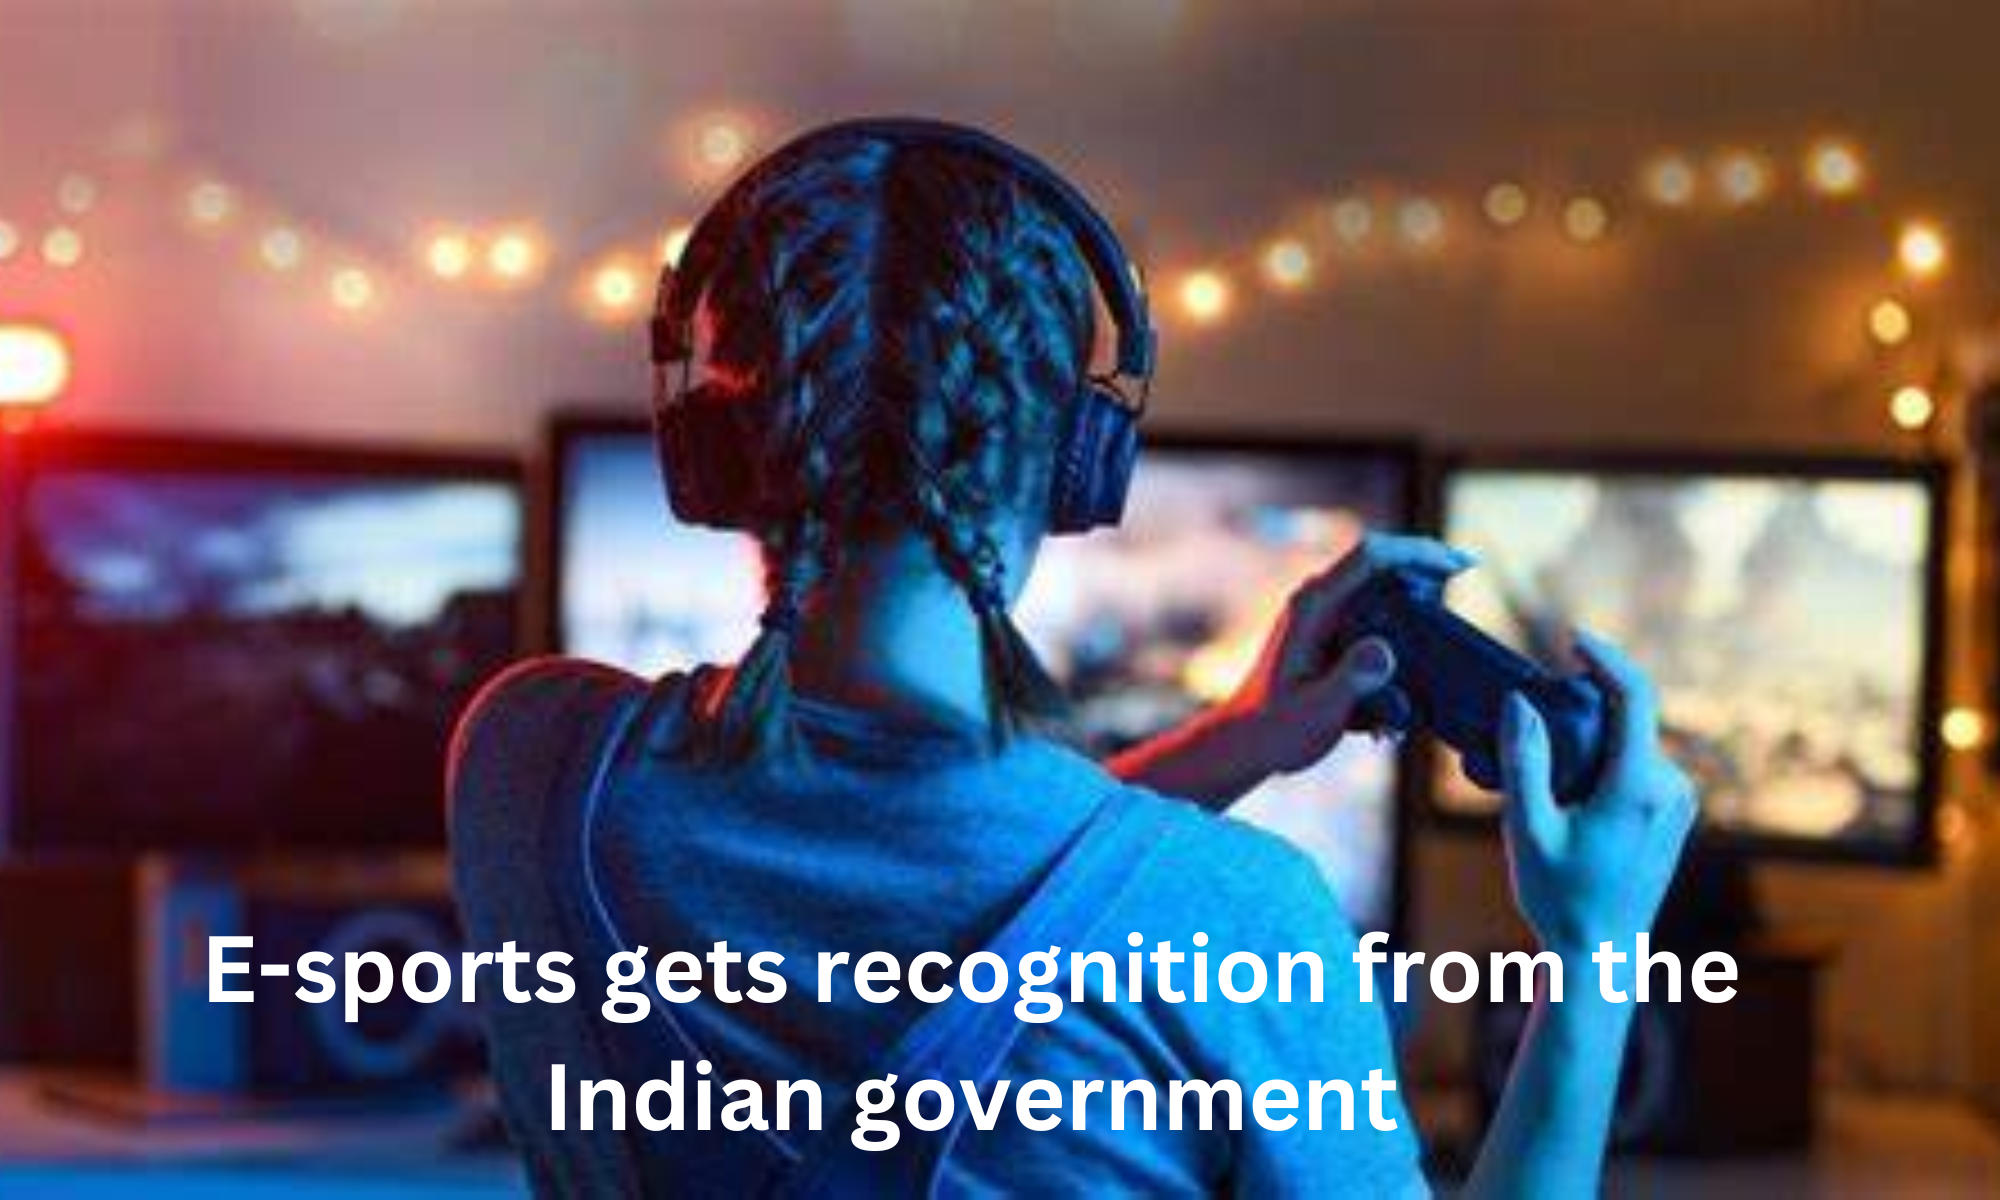 E-sports gets recognition from the Indian government